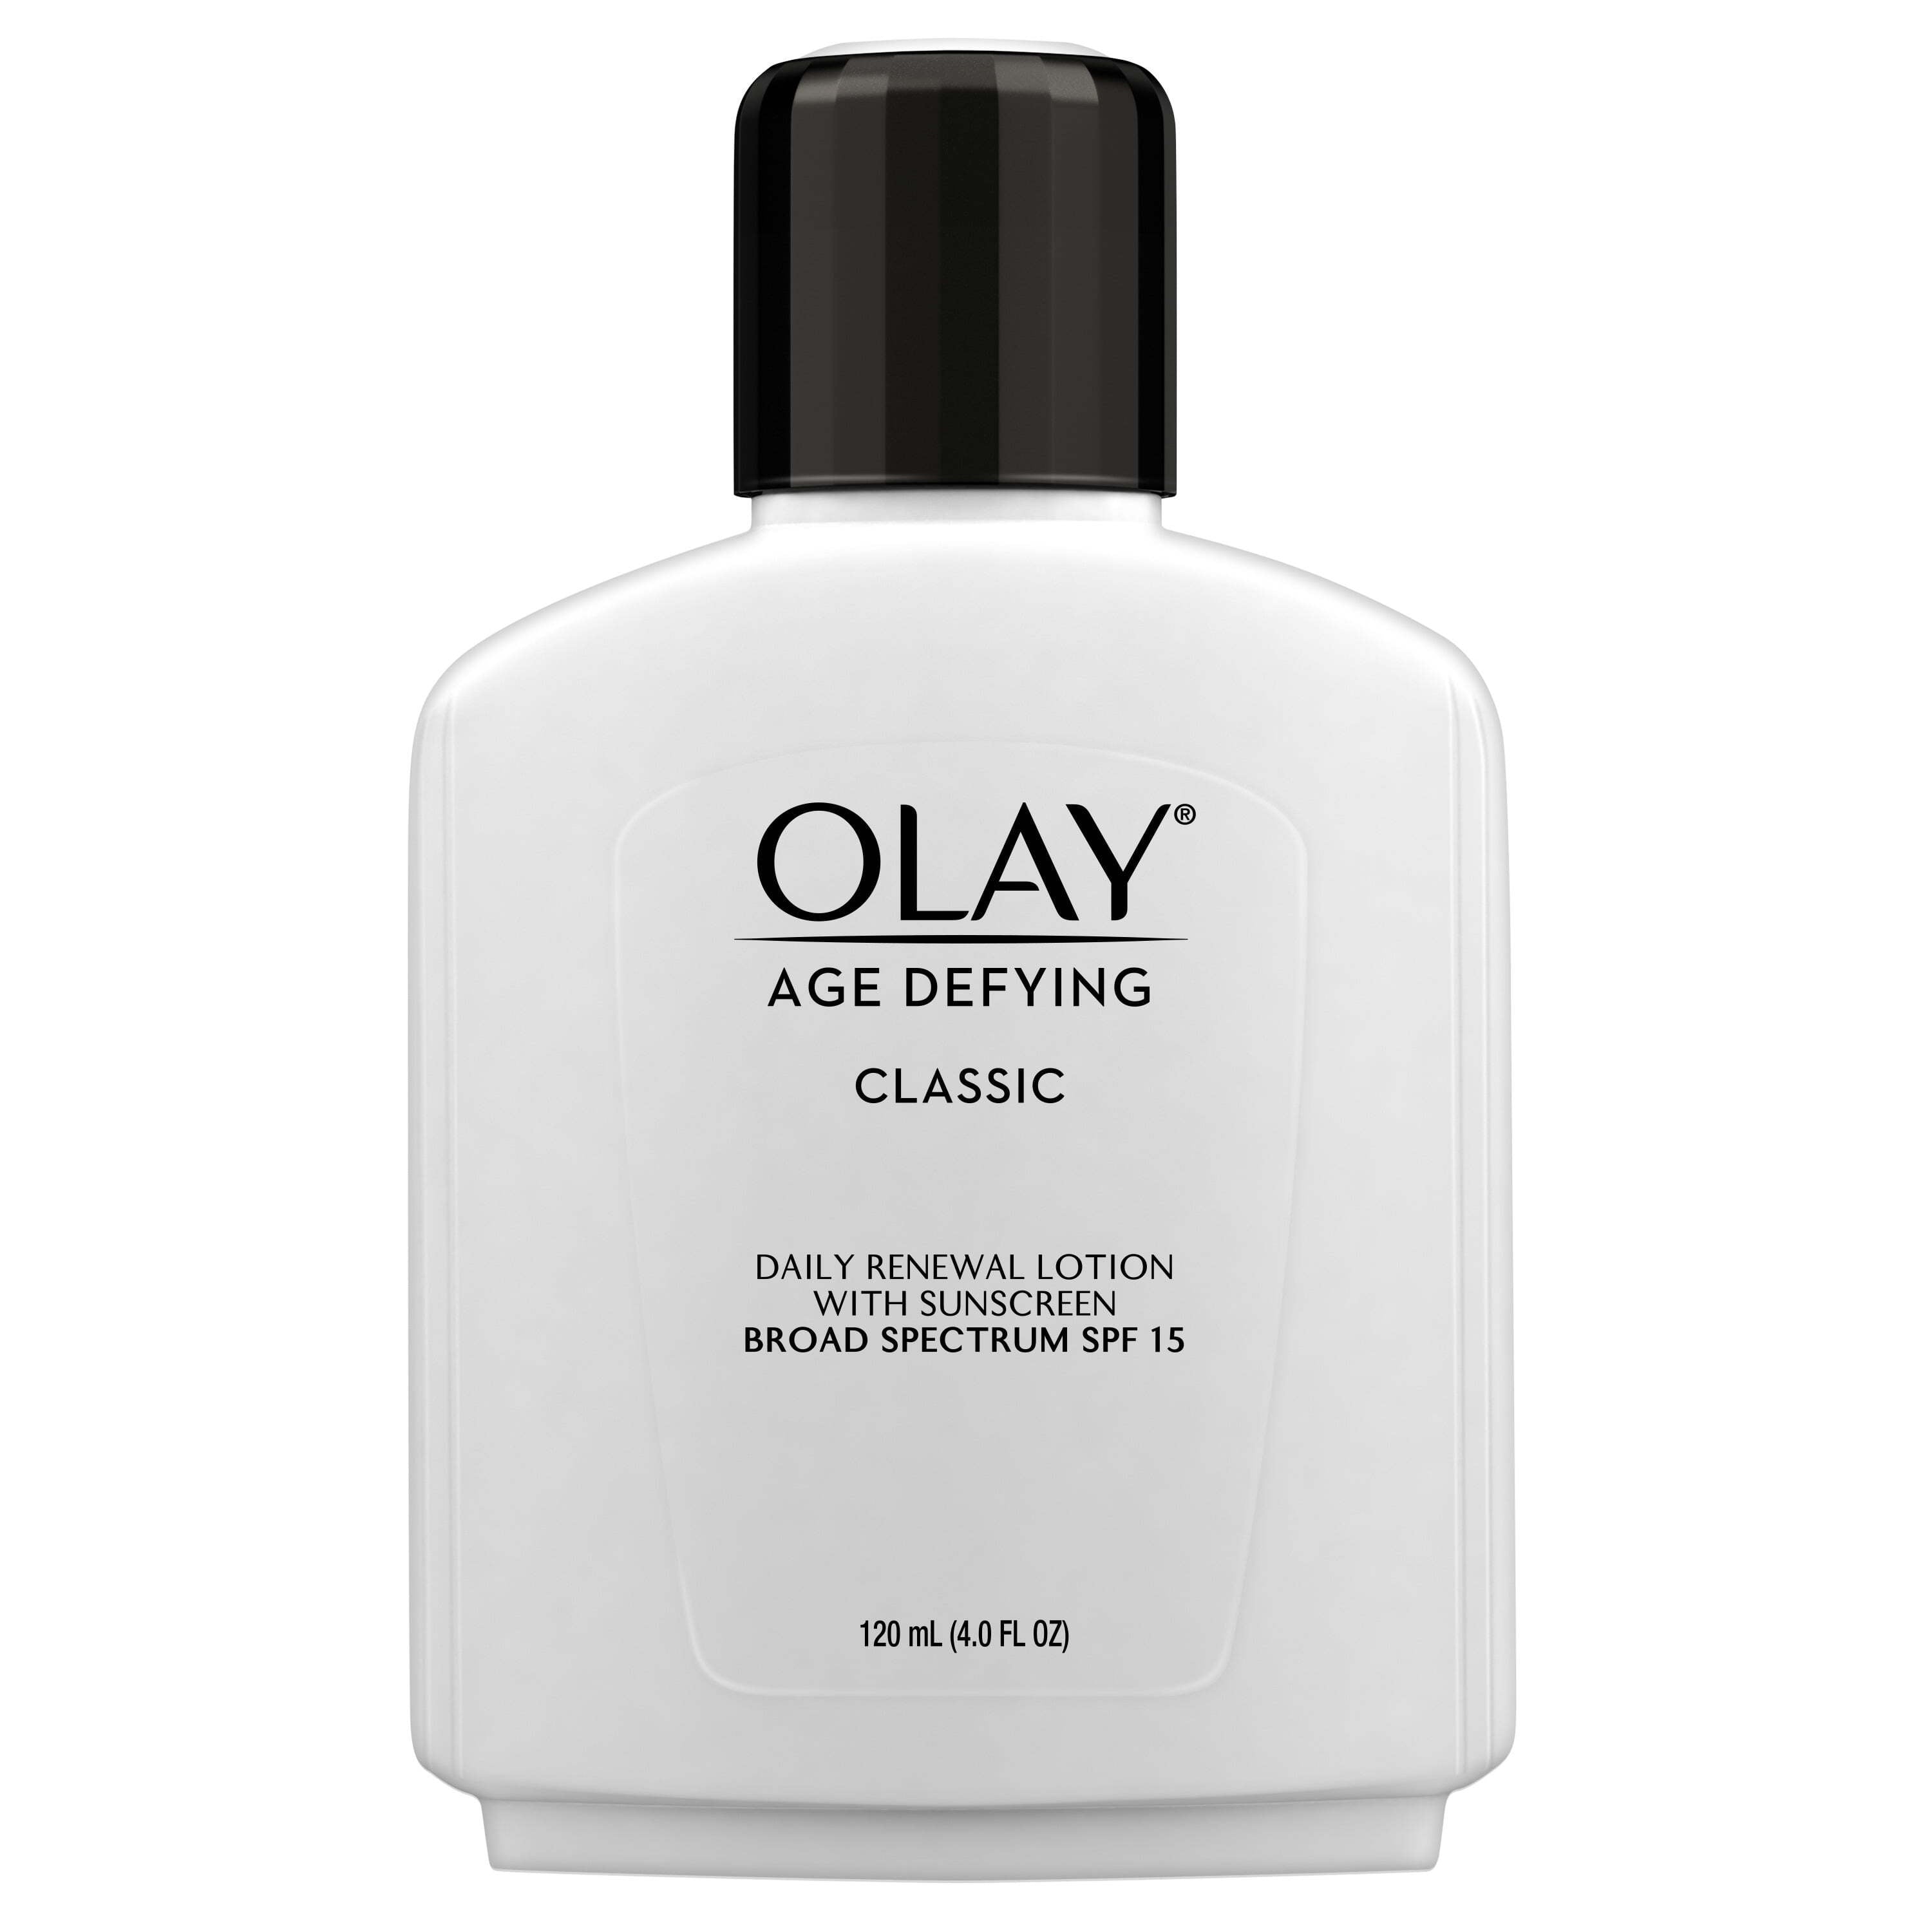 Olay Age Defying Classic Daily Renewal Lotion, Fights Fine Lines & Wrinkles, Normal Skin, SPF 15, 4 fl oz | MTTS312